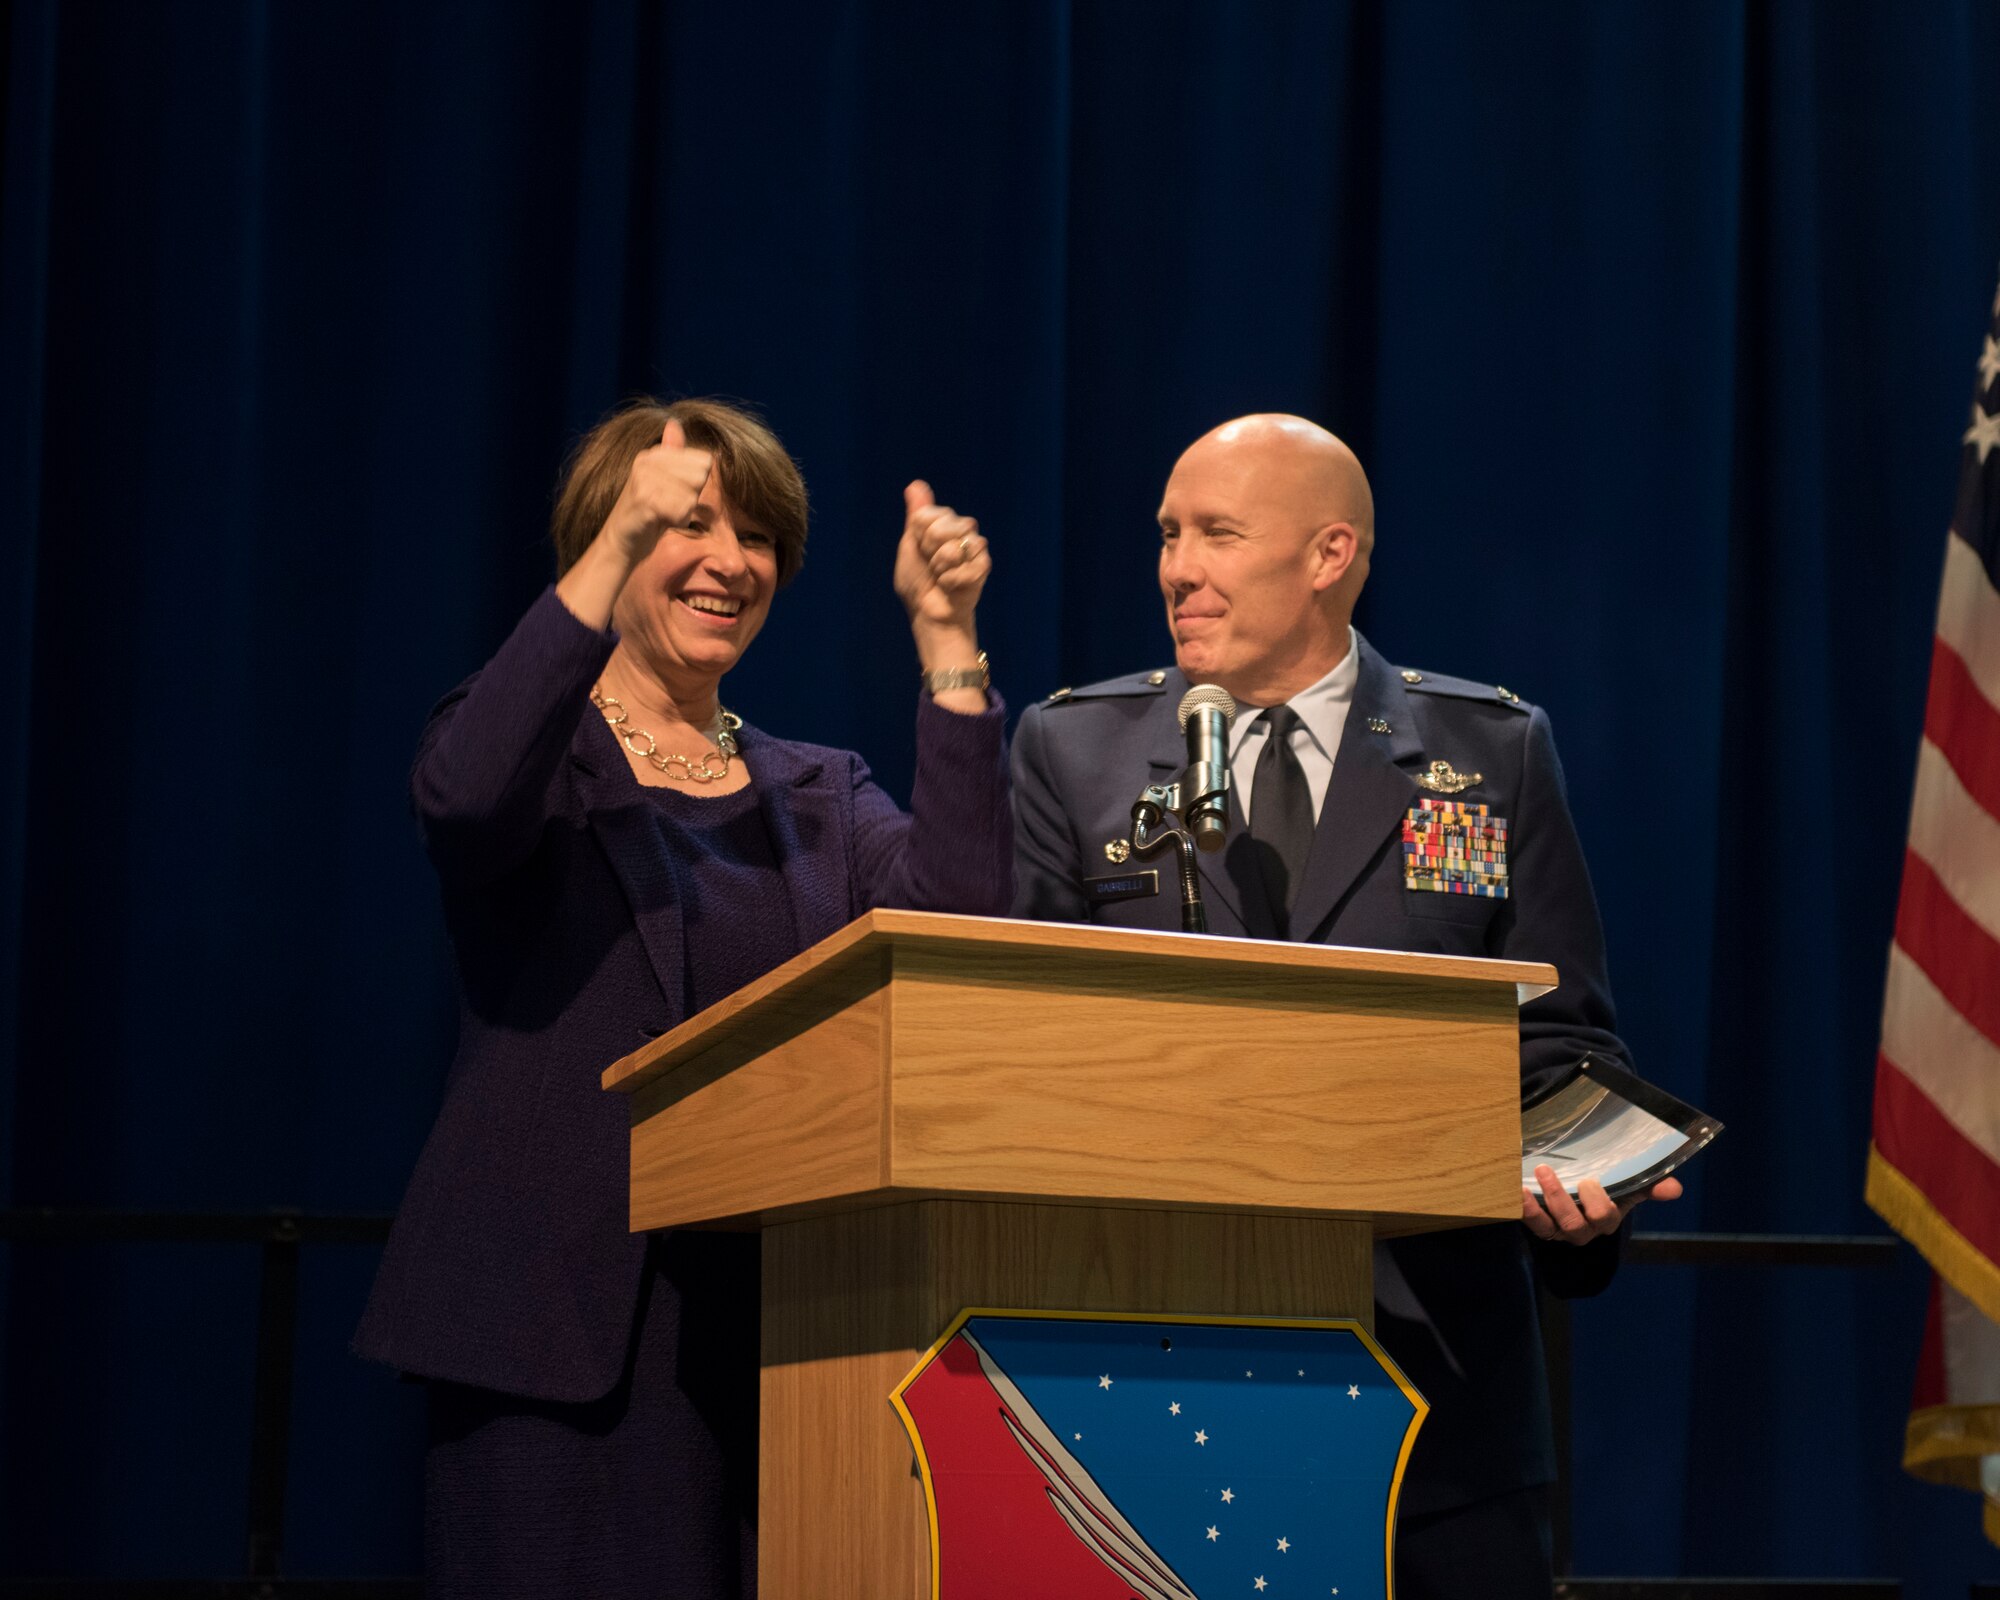 U.S. Air Force Airmen from the 133rd Airlift Wing, along with distinguished guests, former commanders, retirees, and family members attend the annual Wing Award Ceremony in St. Paul, Minn., Dec. 9, 2017.